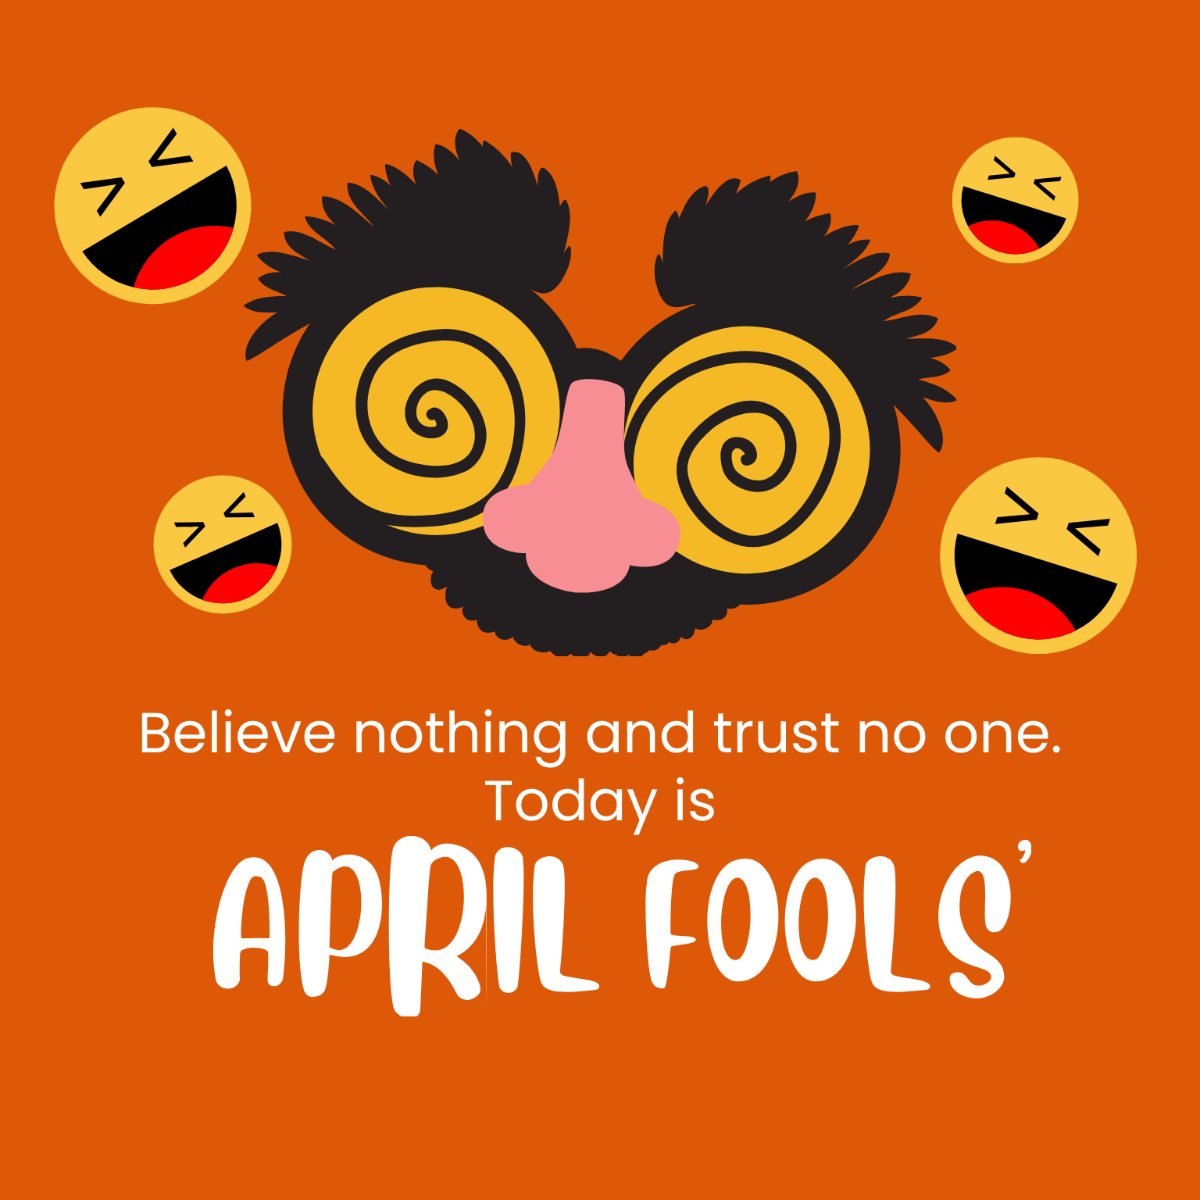 April Fools' Day Greeting Card Vector Template